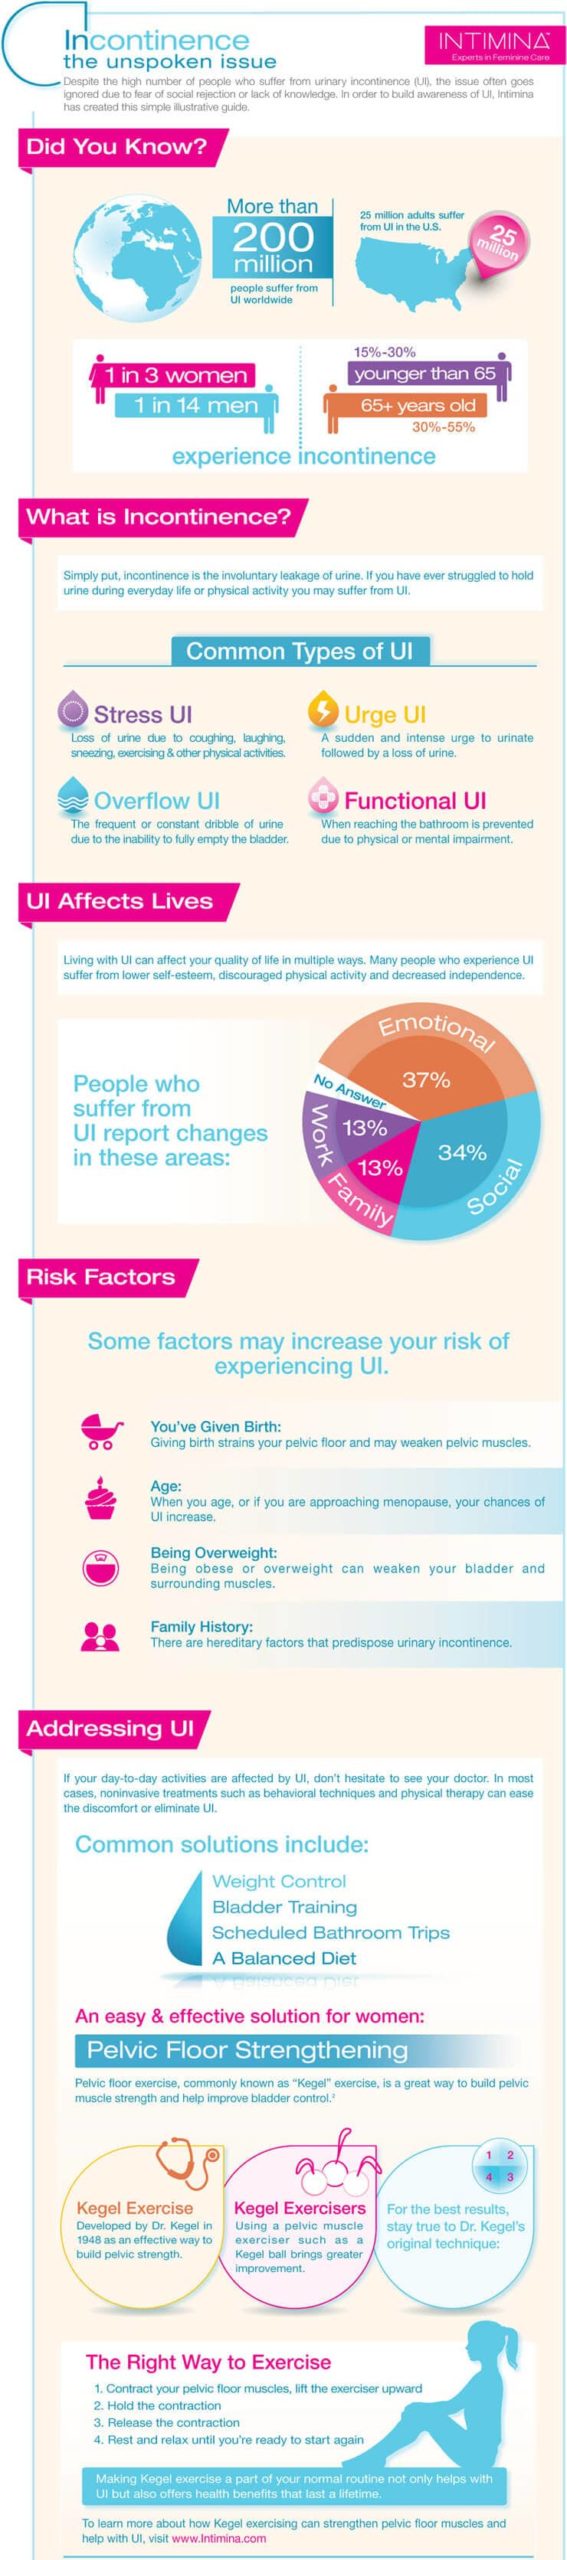 Incontinence infographic